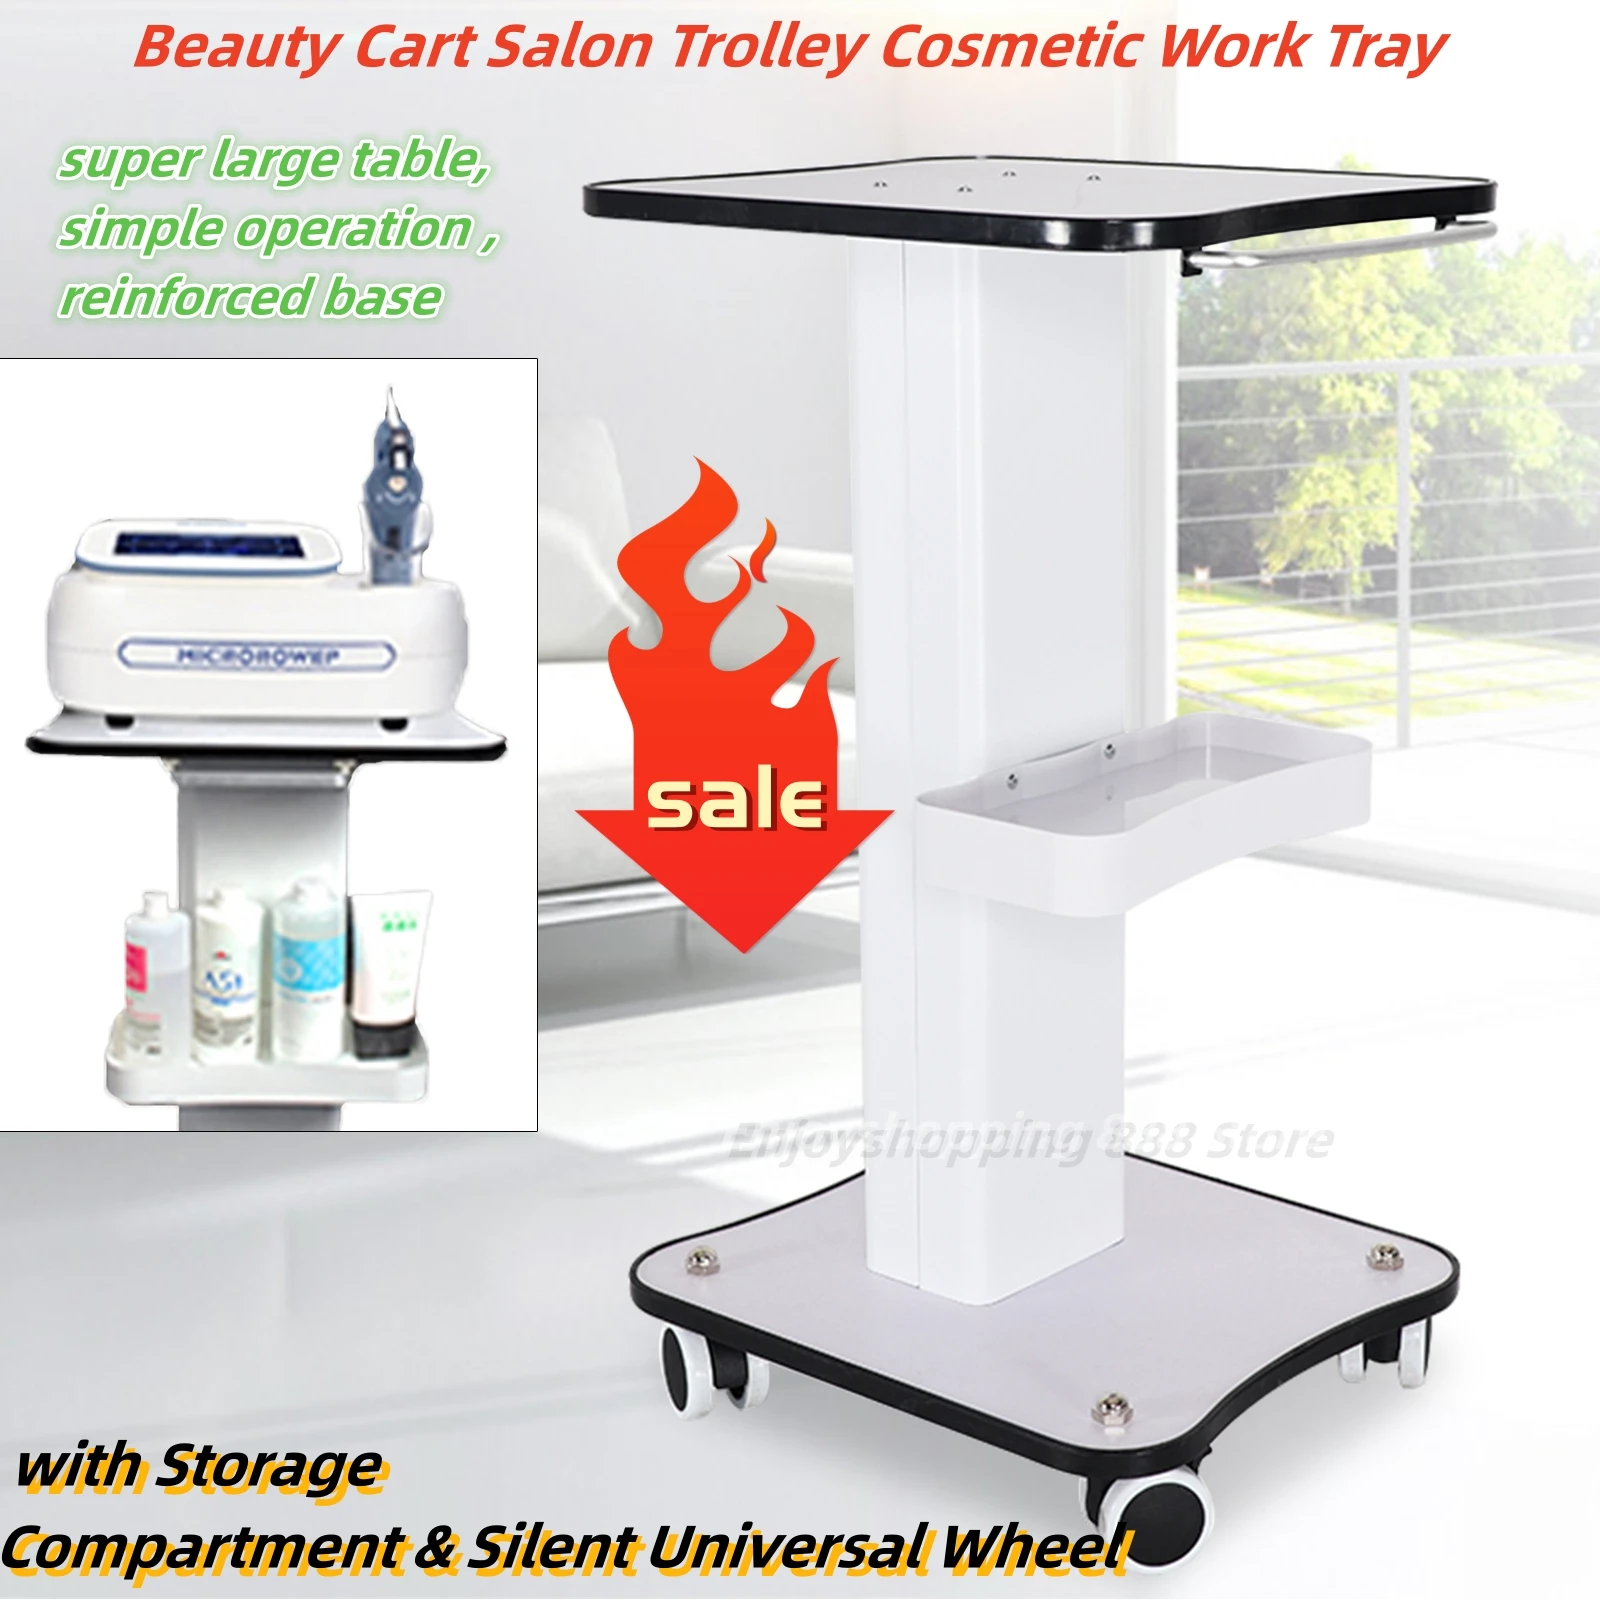 Beauty Cart Salon Trolley Cosmetic Work Tray with Storage Compartment & Silent Universal Wheel cloth box universal universal wheel flat angle trolley case silent pulley suitcase wheel shock absorbing boarding case wheel